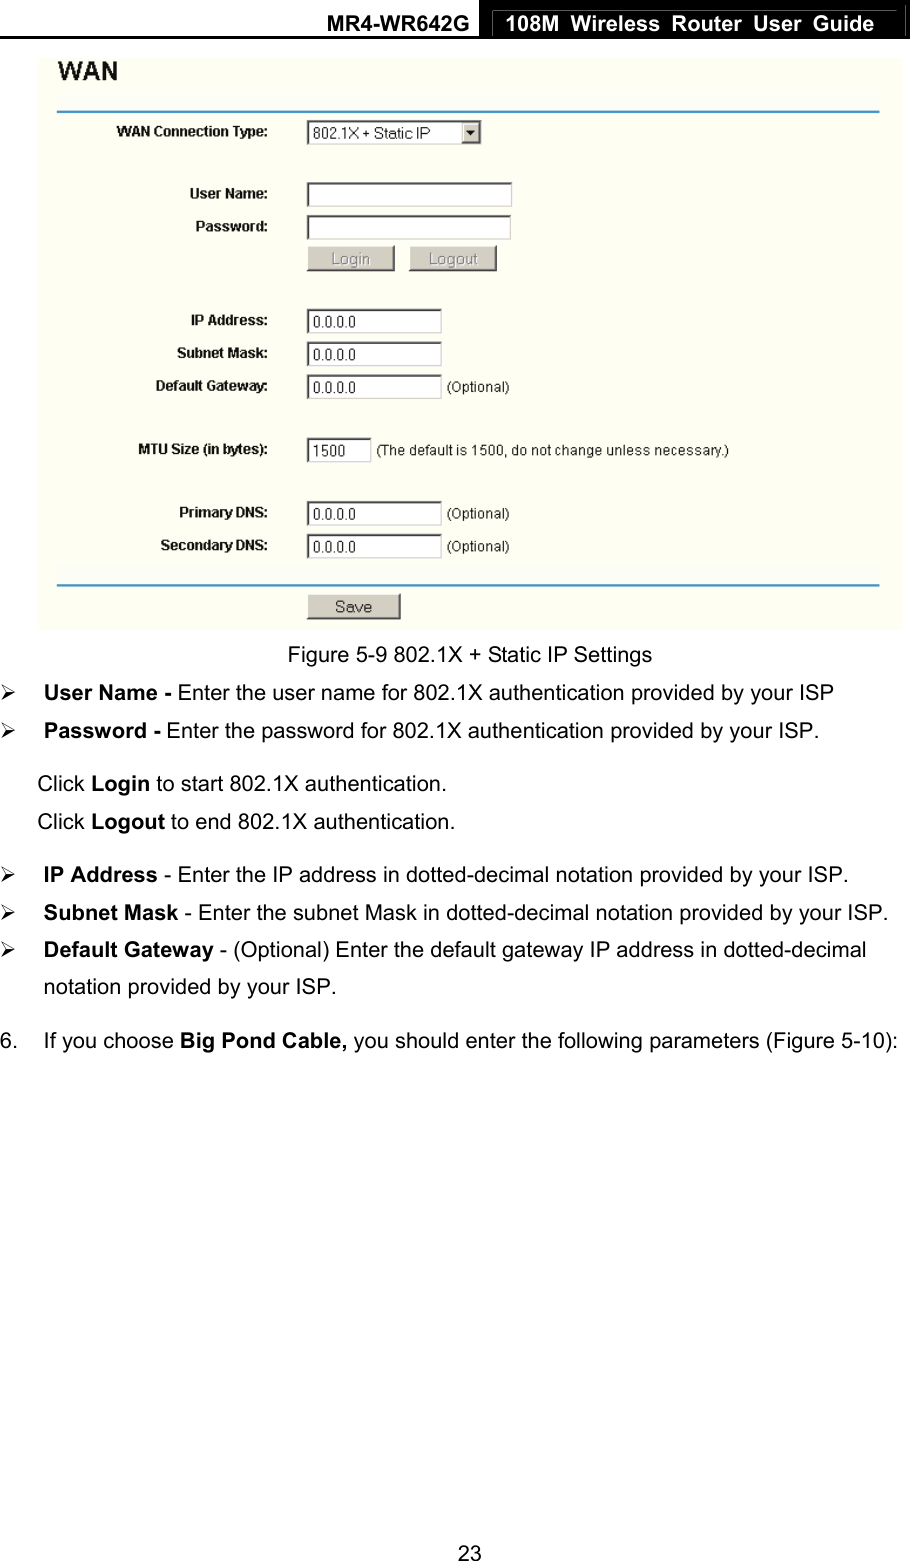 MR4-WR642G 108M Wireless Router User Guide   23 Figure 5-9 802.1X + Static IP Settings ¾ User Name - Enter the user name for 802.1X authentication provided by your ISP ¾ Password - Enter the password for 802.1X authentication provided by your ISP. Click Login to start 802.1X authentication. Click Logout to end 802.1X authentication. ¾ IP Address - Enter the IP address in dotted-decimal notation provided by your ISP. ¾ Subnet Mask - Enter the subnet Mask in dotted-decimal notation provided by your ISP. ¾ Default Gateway - (Optional) Enter the default gateway IP address in dotted-decimal notation provided by your ISP. 6.  If you choose Big Pond Cable, you should enter the following parameters (Figure 5-10):   